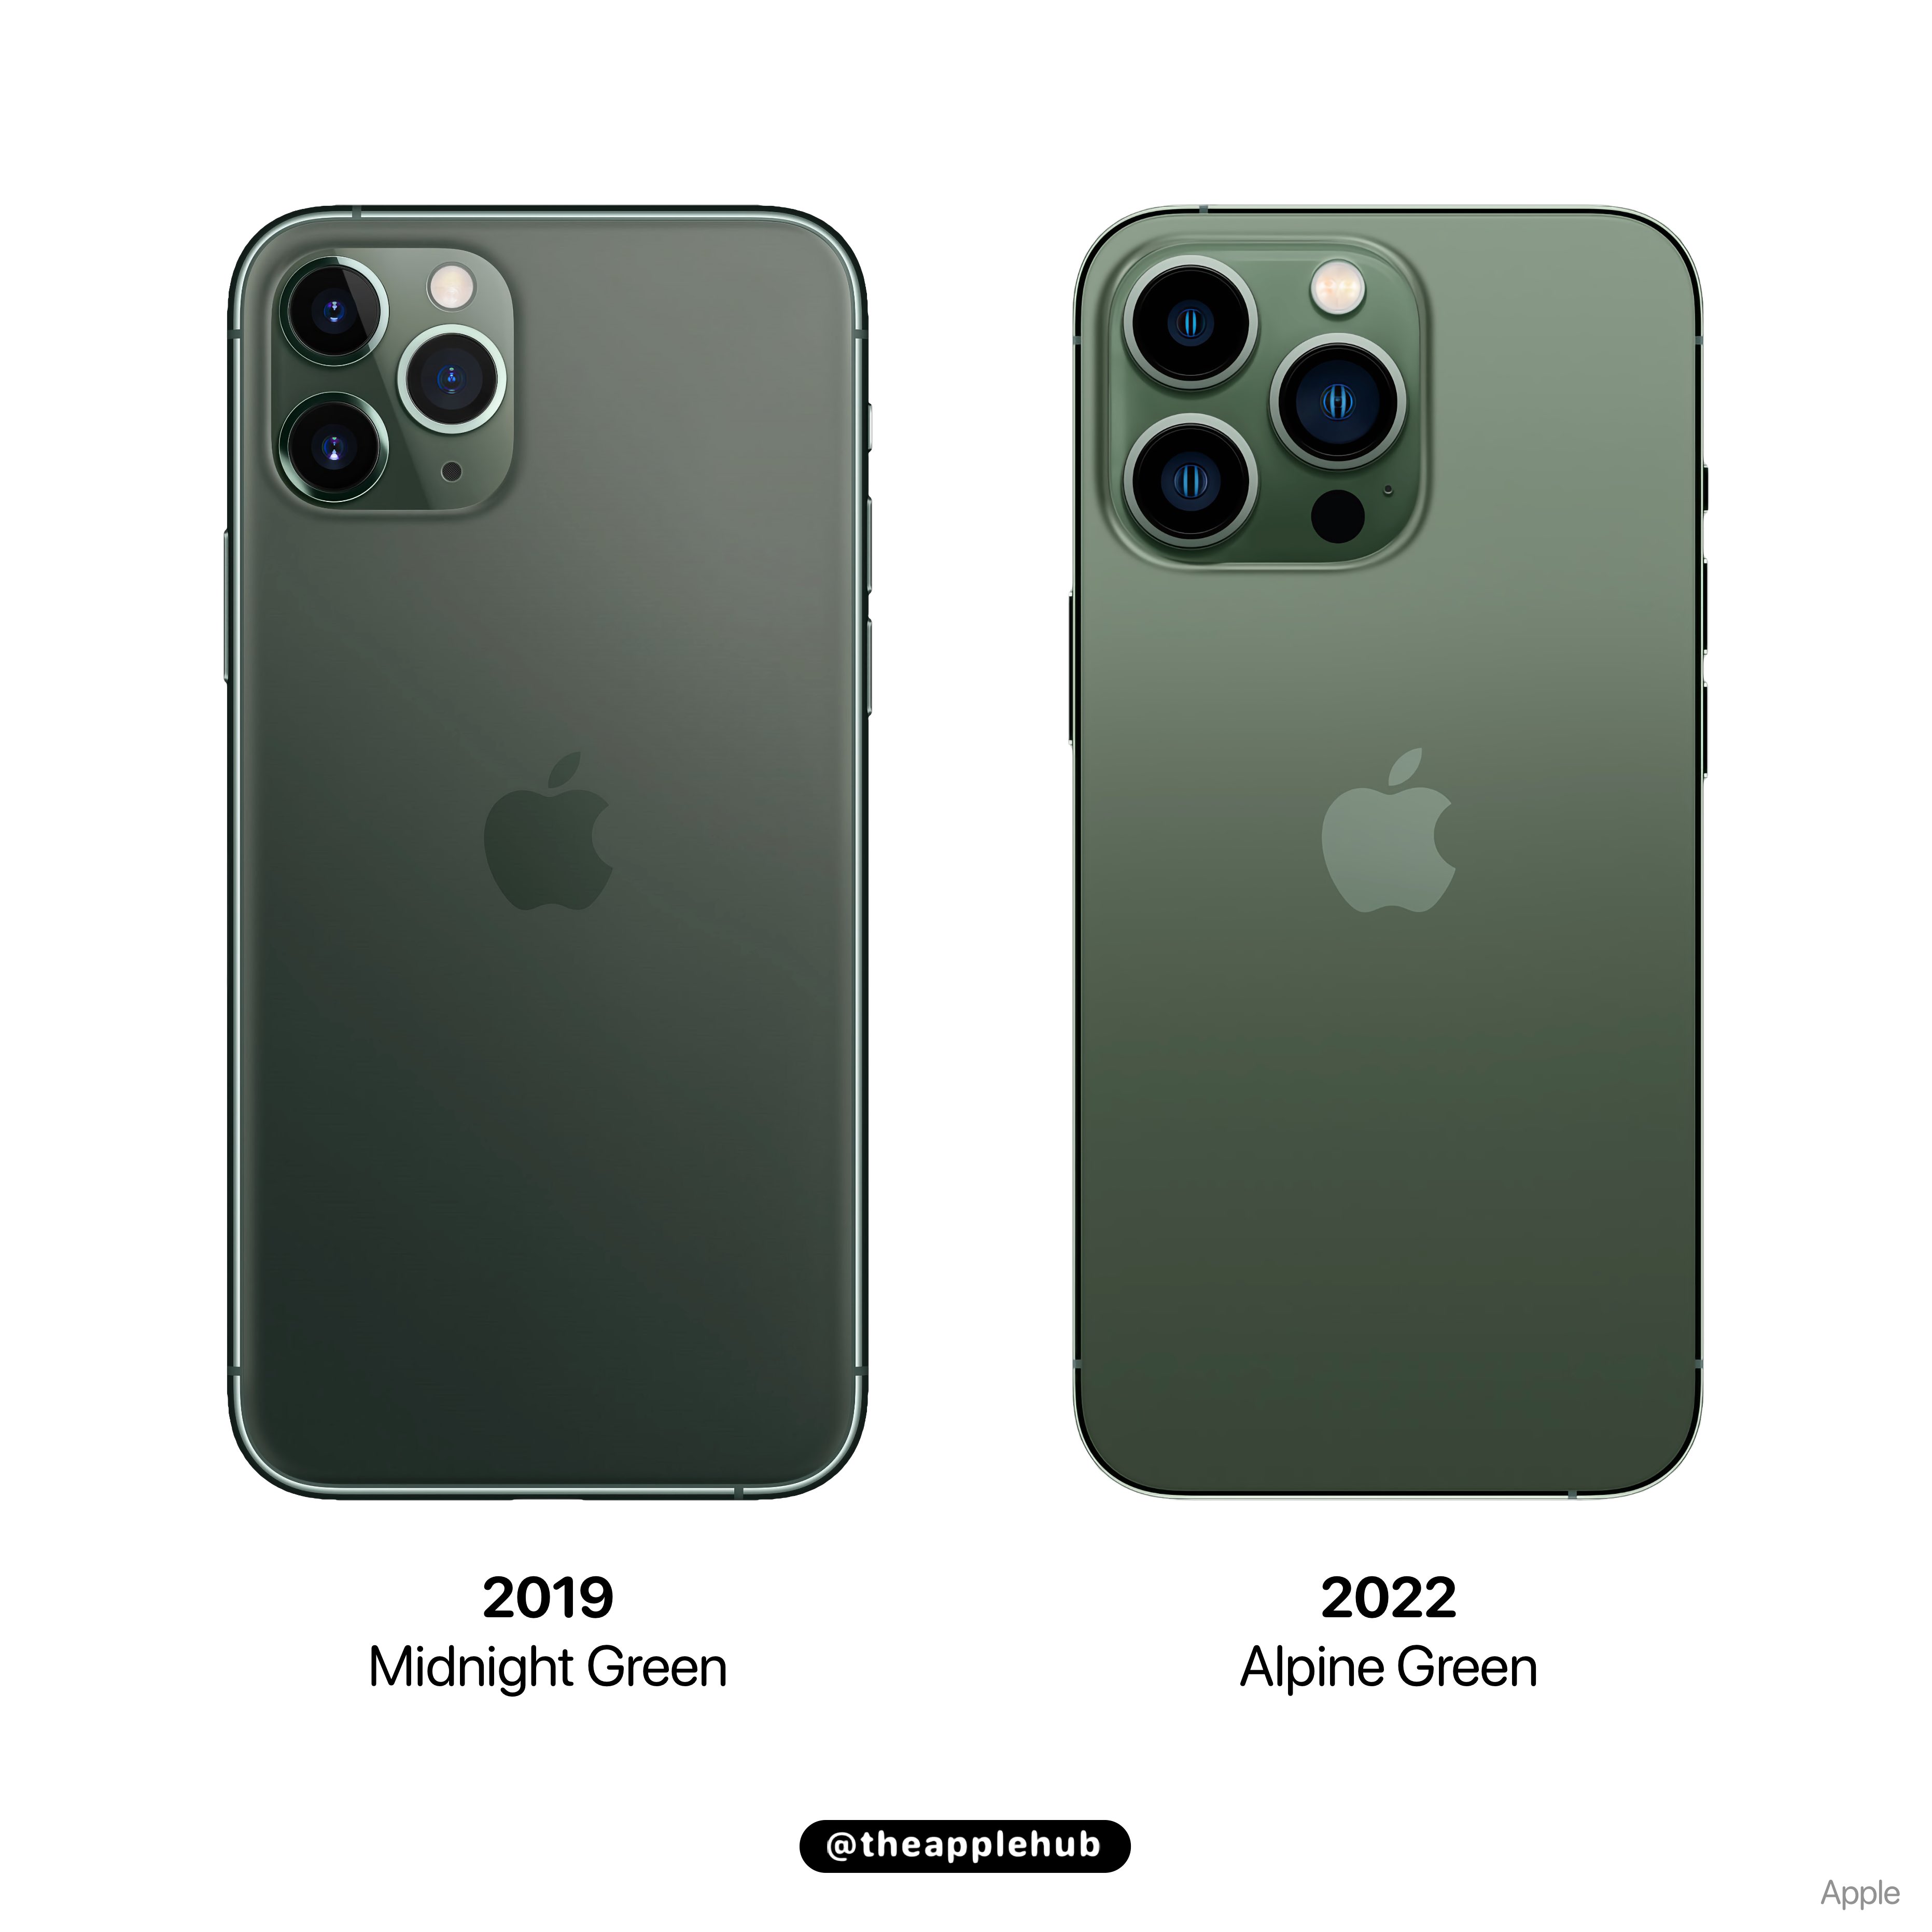 Apple Hub The Iphone 11 Pro Midnight Green Vs The Iphone 13 Pro Alpine Green Which One Do You Prefer T Co Jaiskcbfl7 Twitter